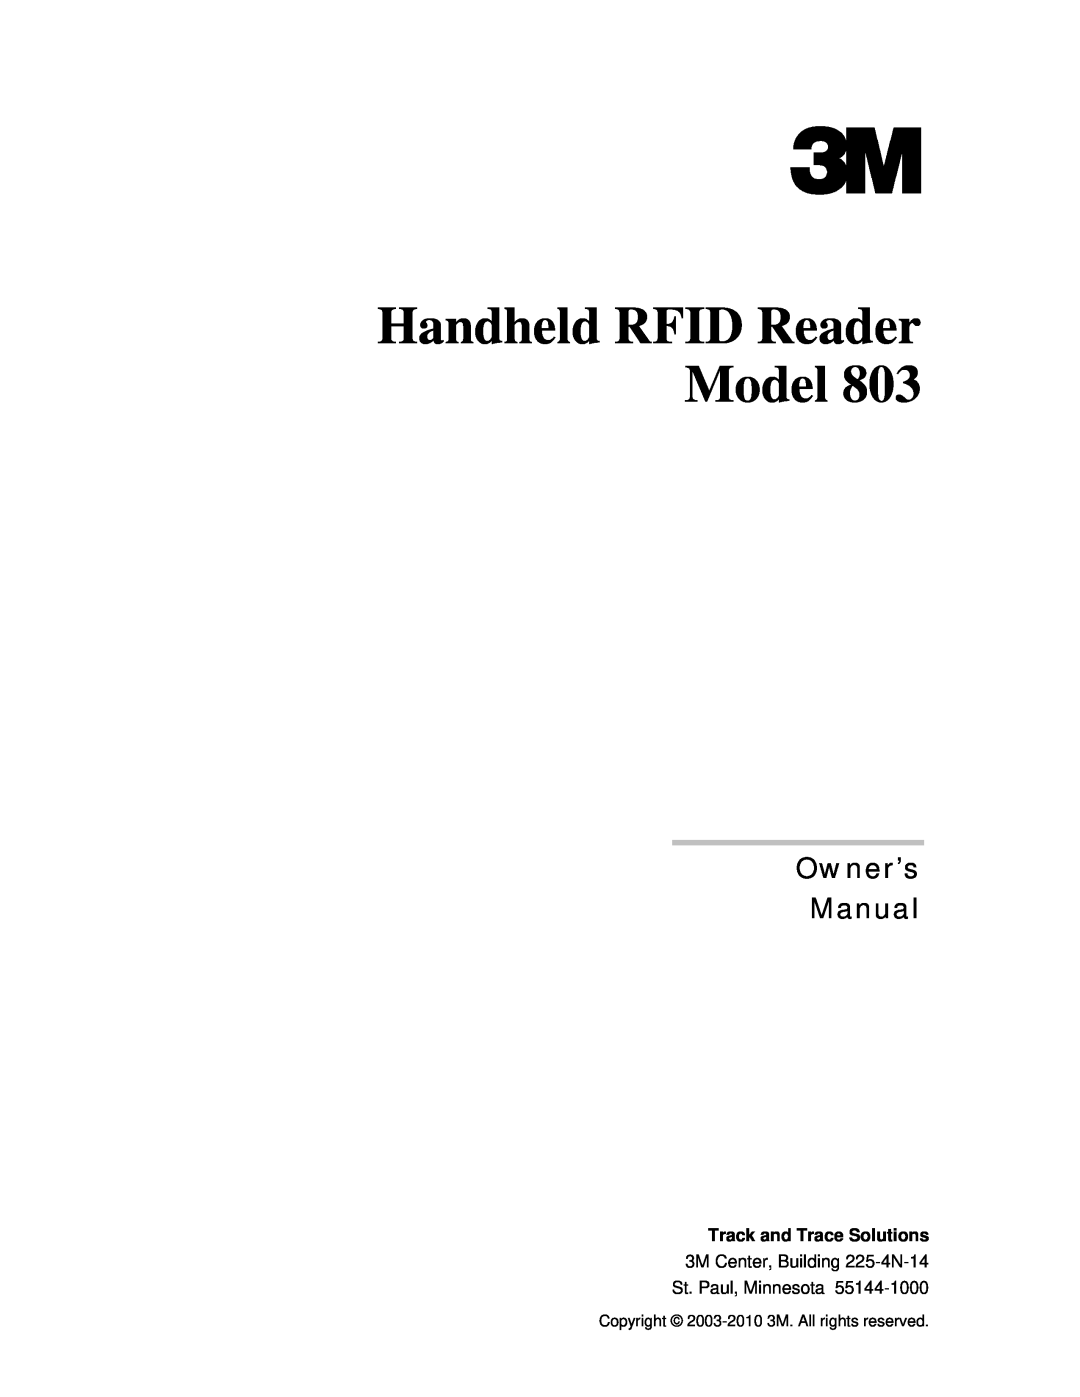 3M 803 owner manual Track and Trace Solutions, Handheld RFID Reader Model, Owner’s Manual 